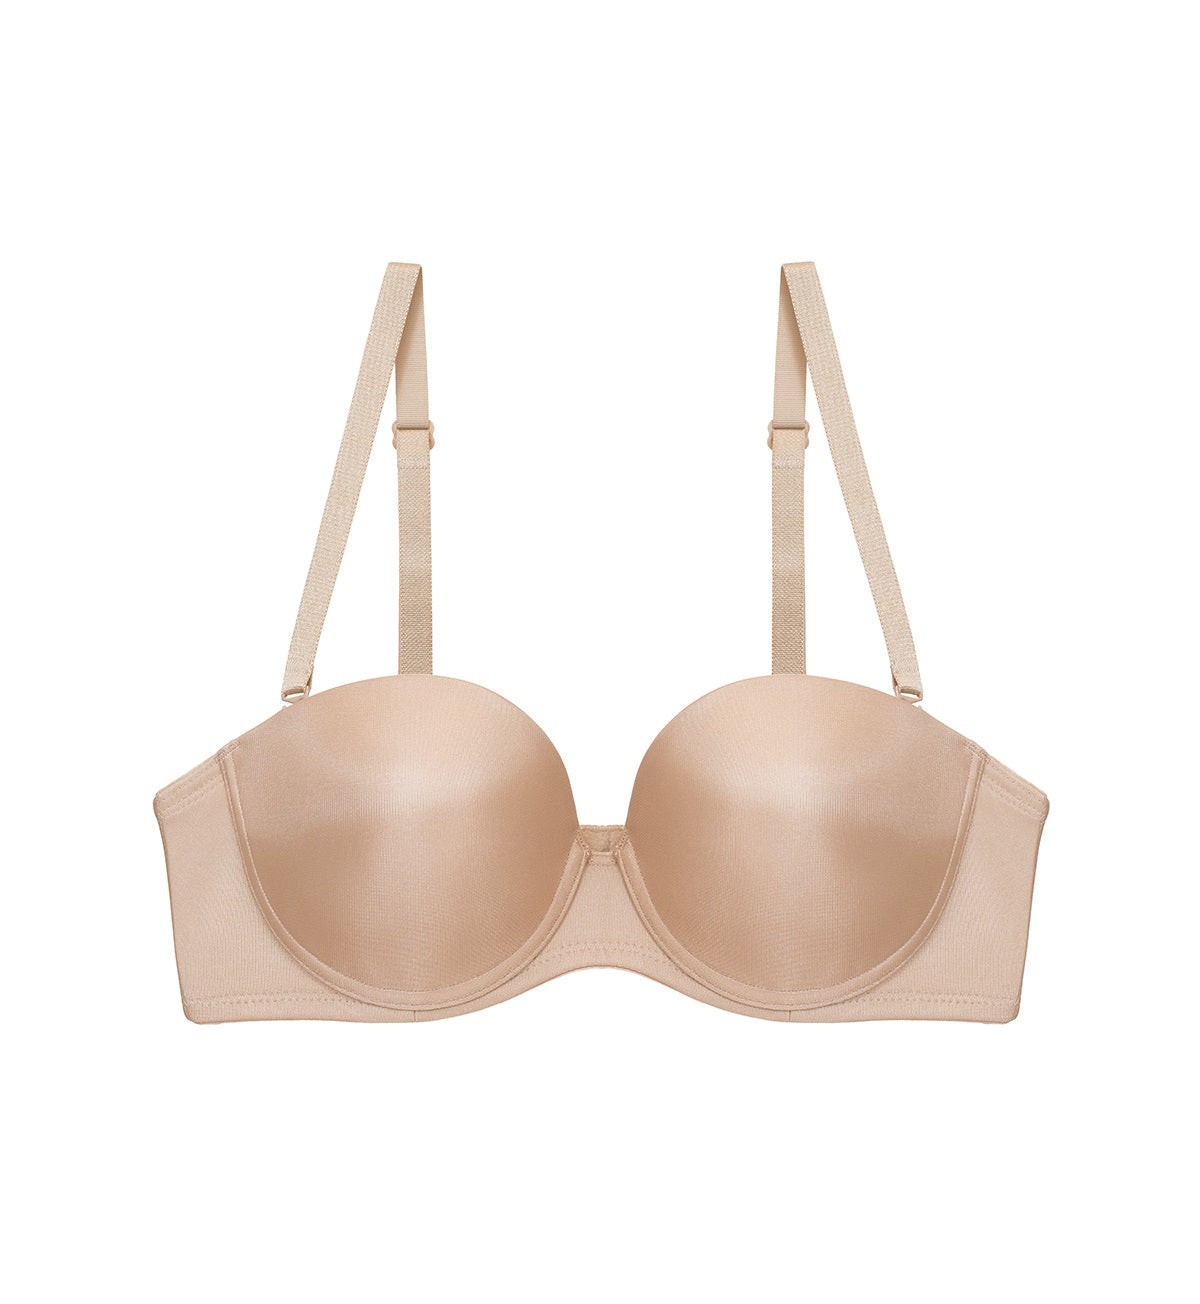 Wired Bras, Invisible, Maximizer Wired Bra With Detachable Straps